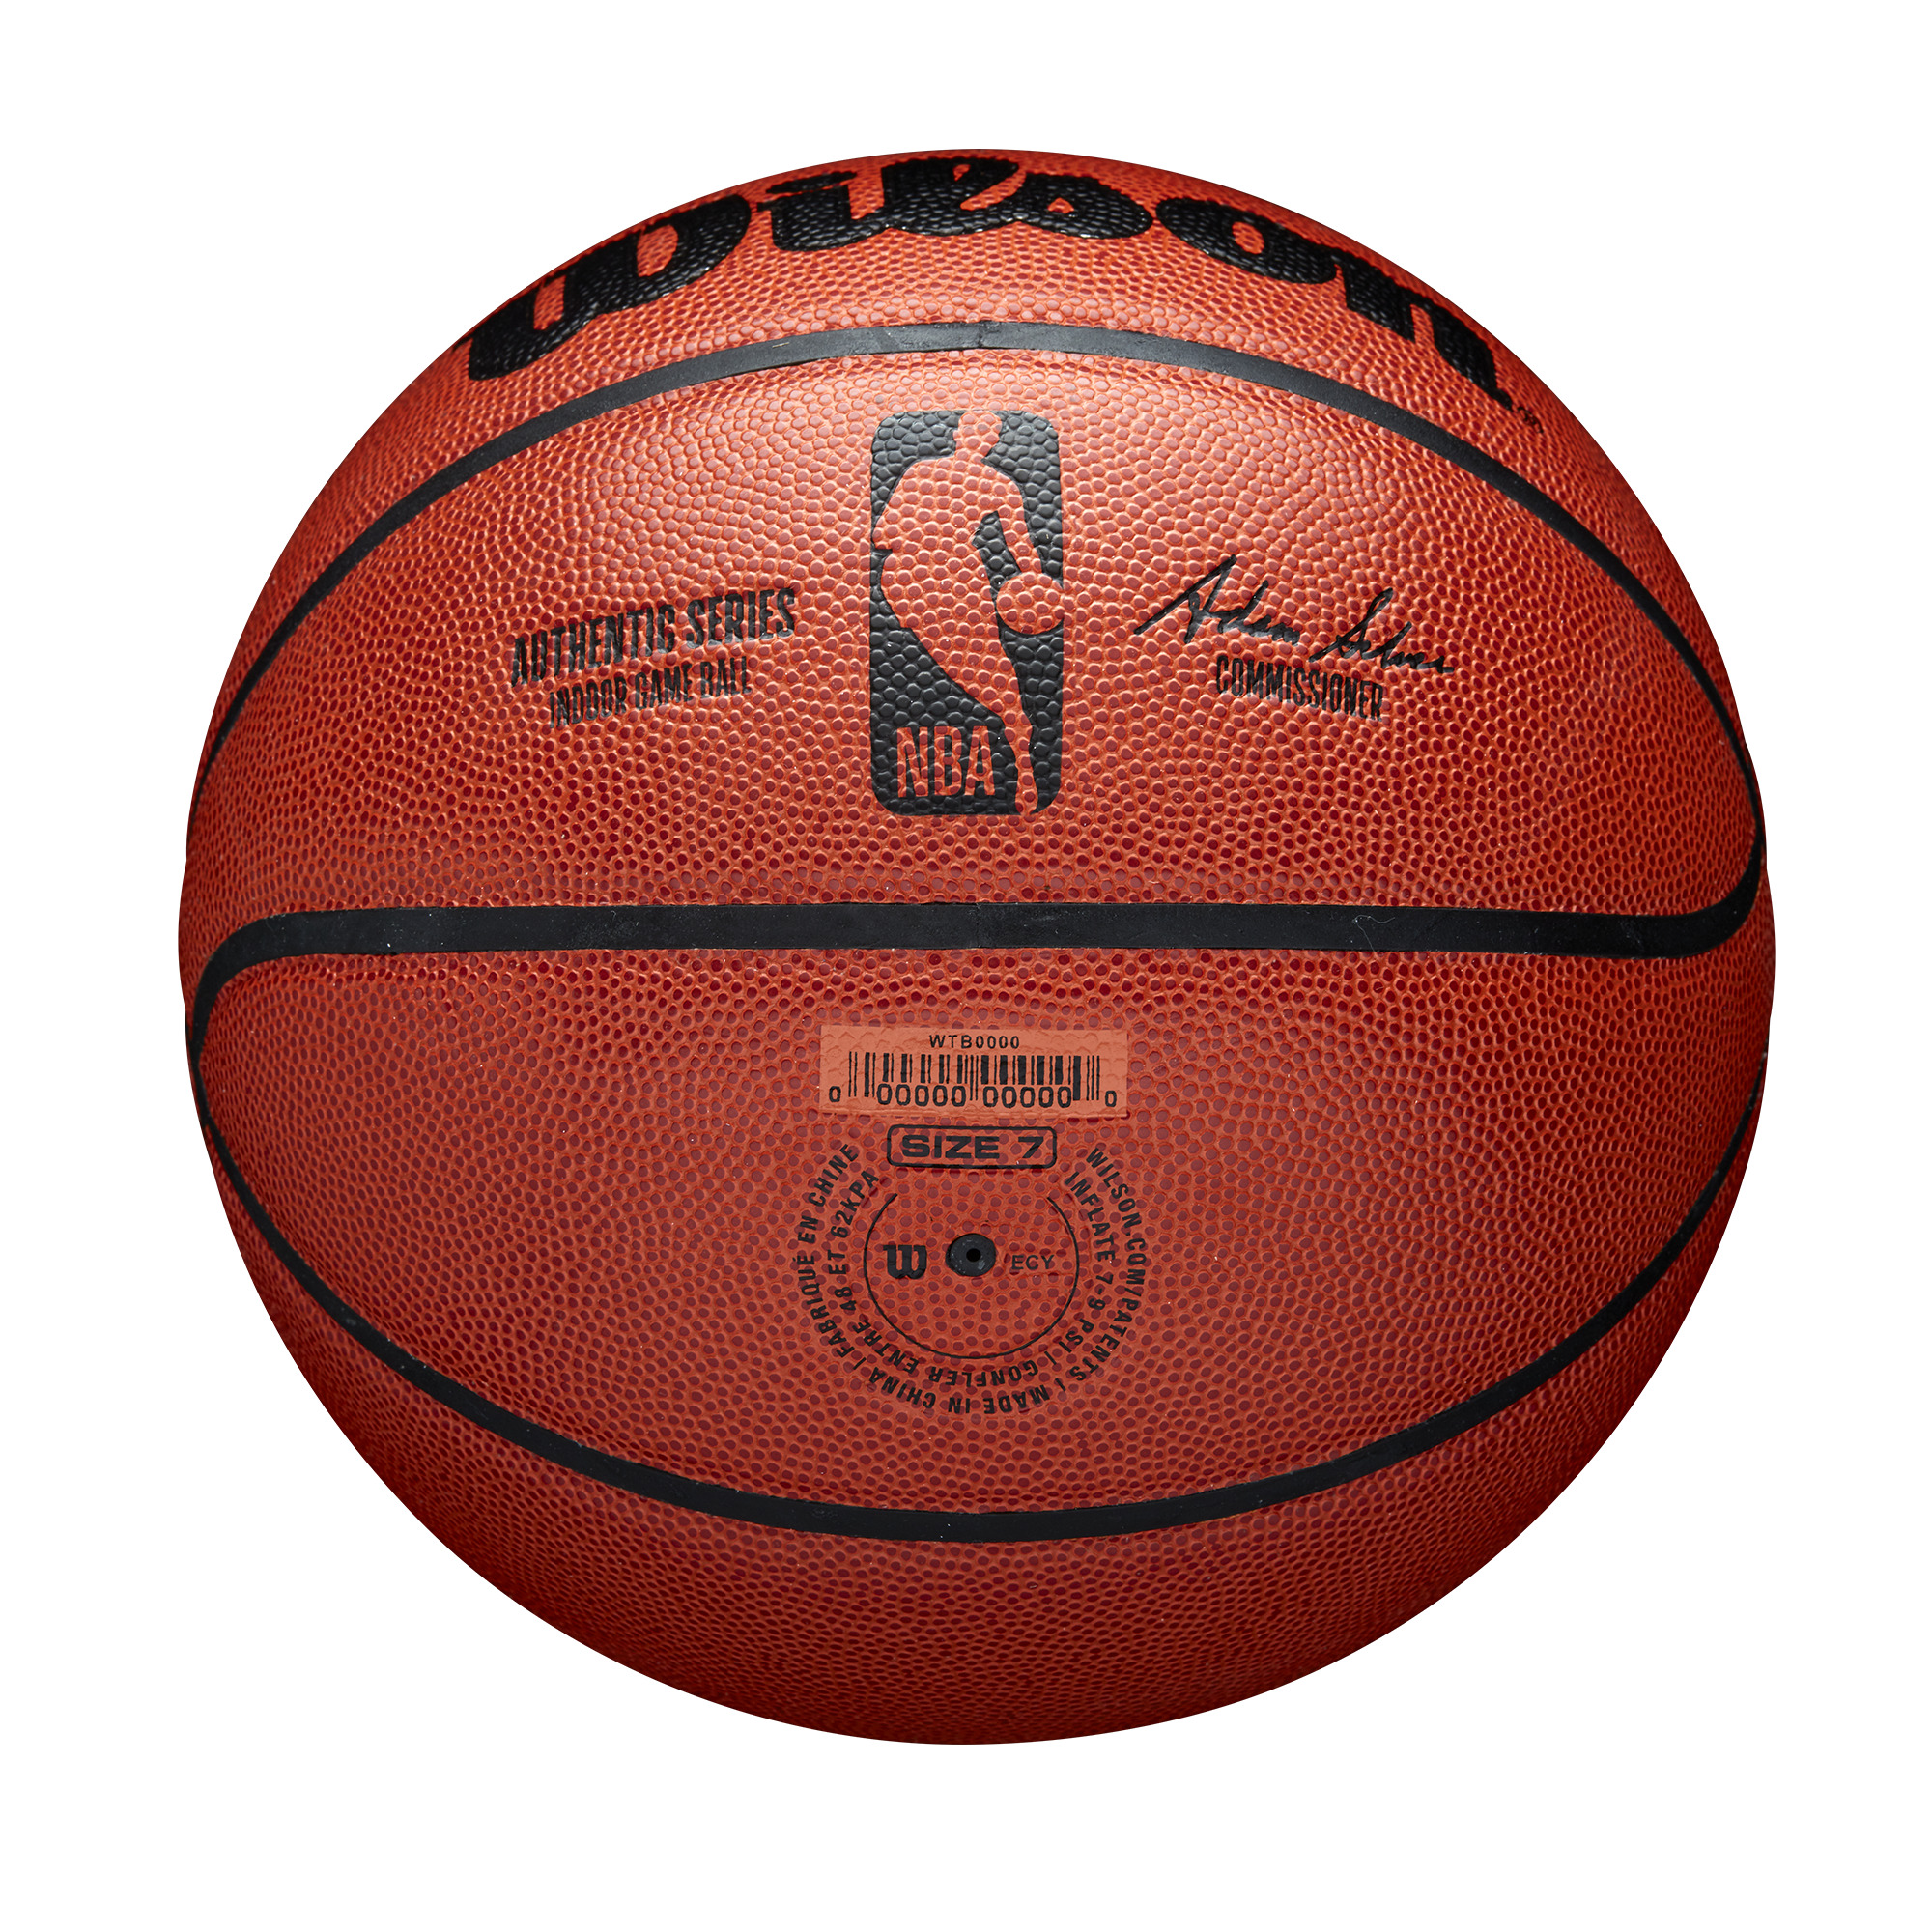 Wilson NBA Authentic Indoor Competition Basketball, Brown, 29.5 in. - image 2 of 6